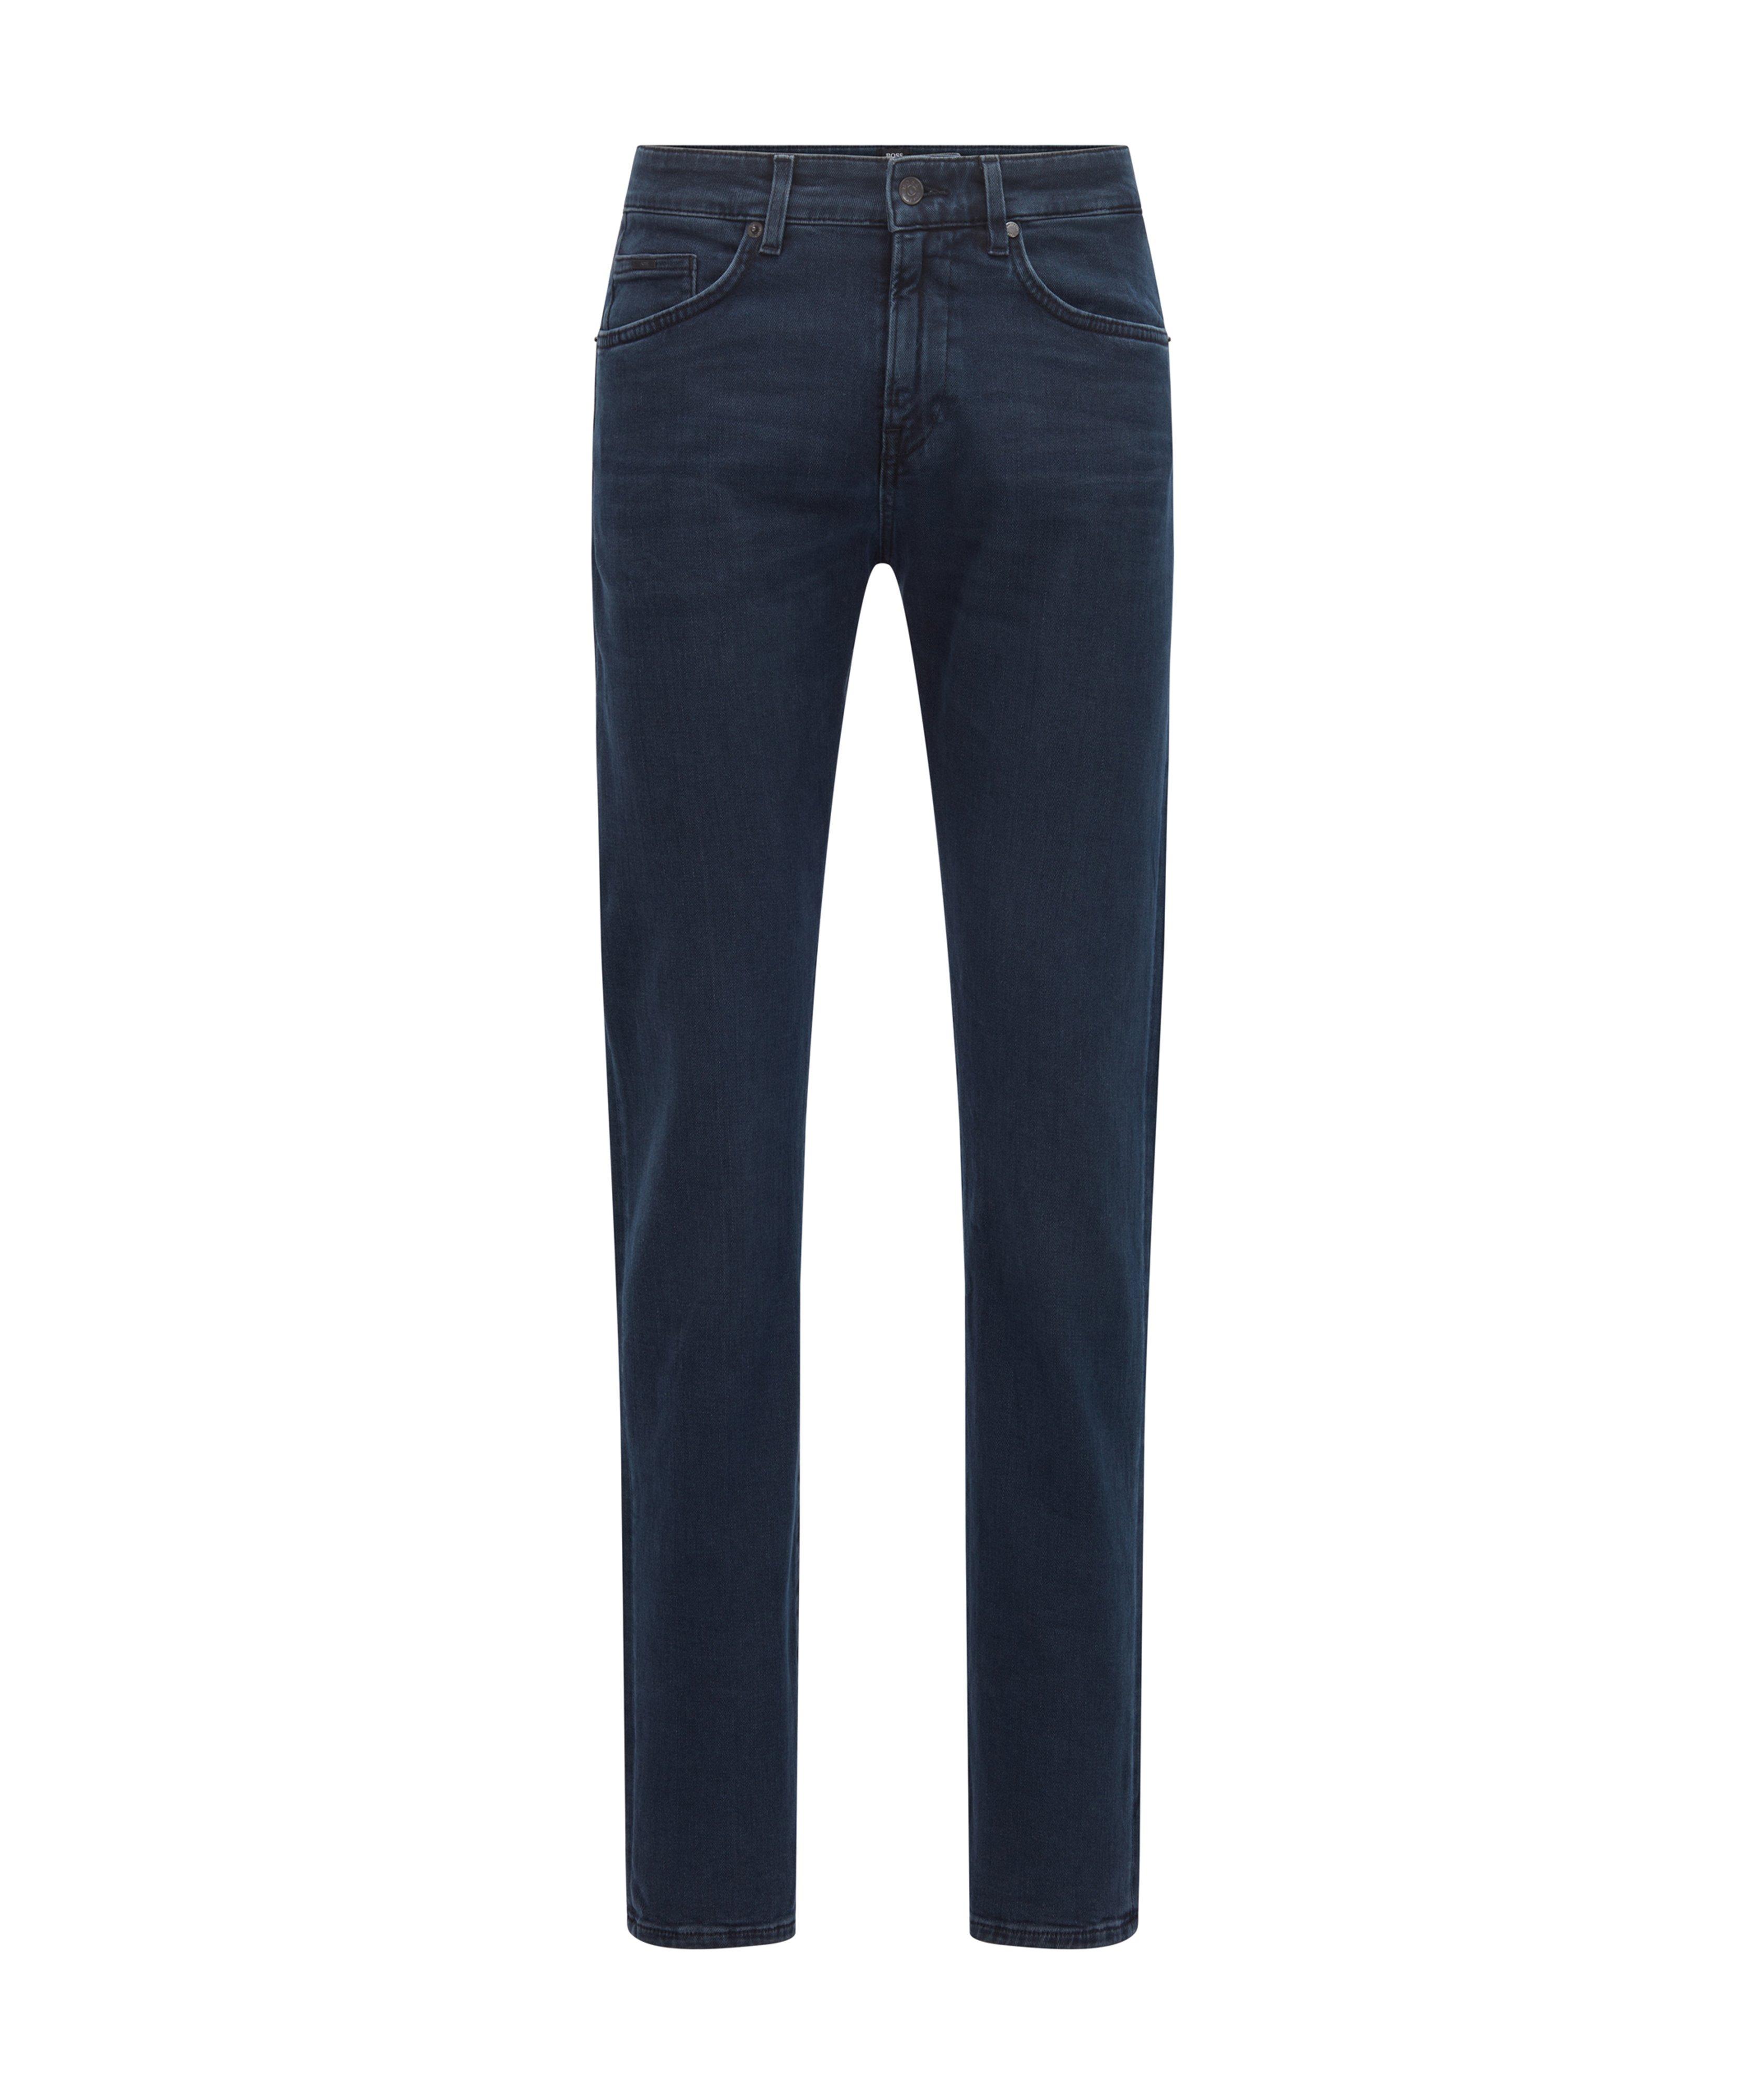 Slim-Fit Cashmere Touch Jeans image 0